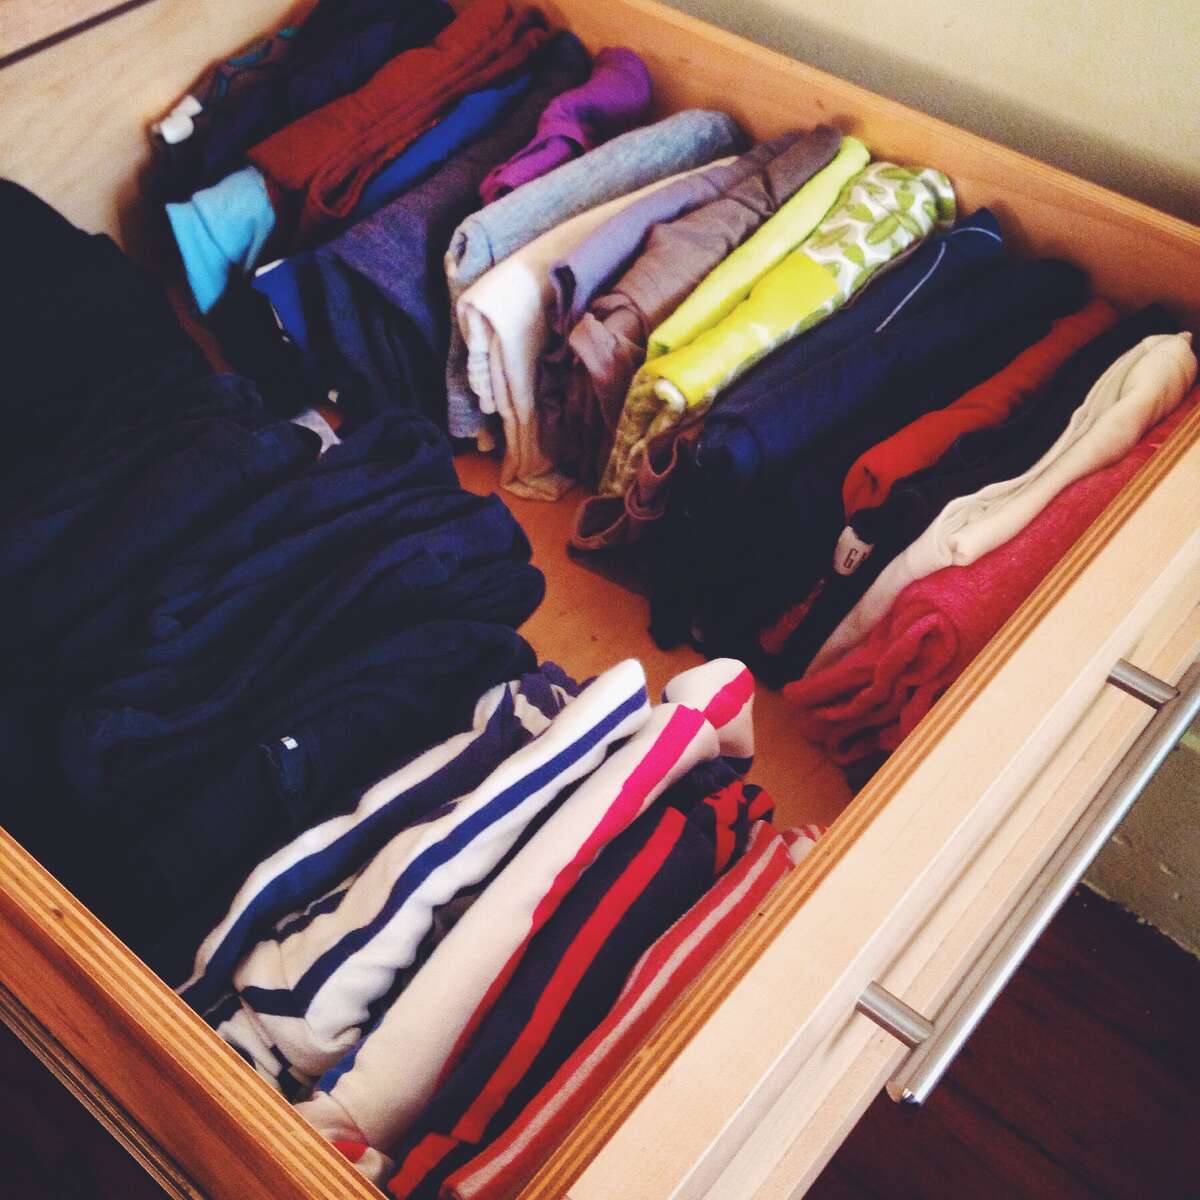 The Konmari T-shirt filing system works: more room, no wrinkles and I can see everything.